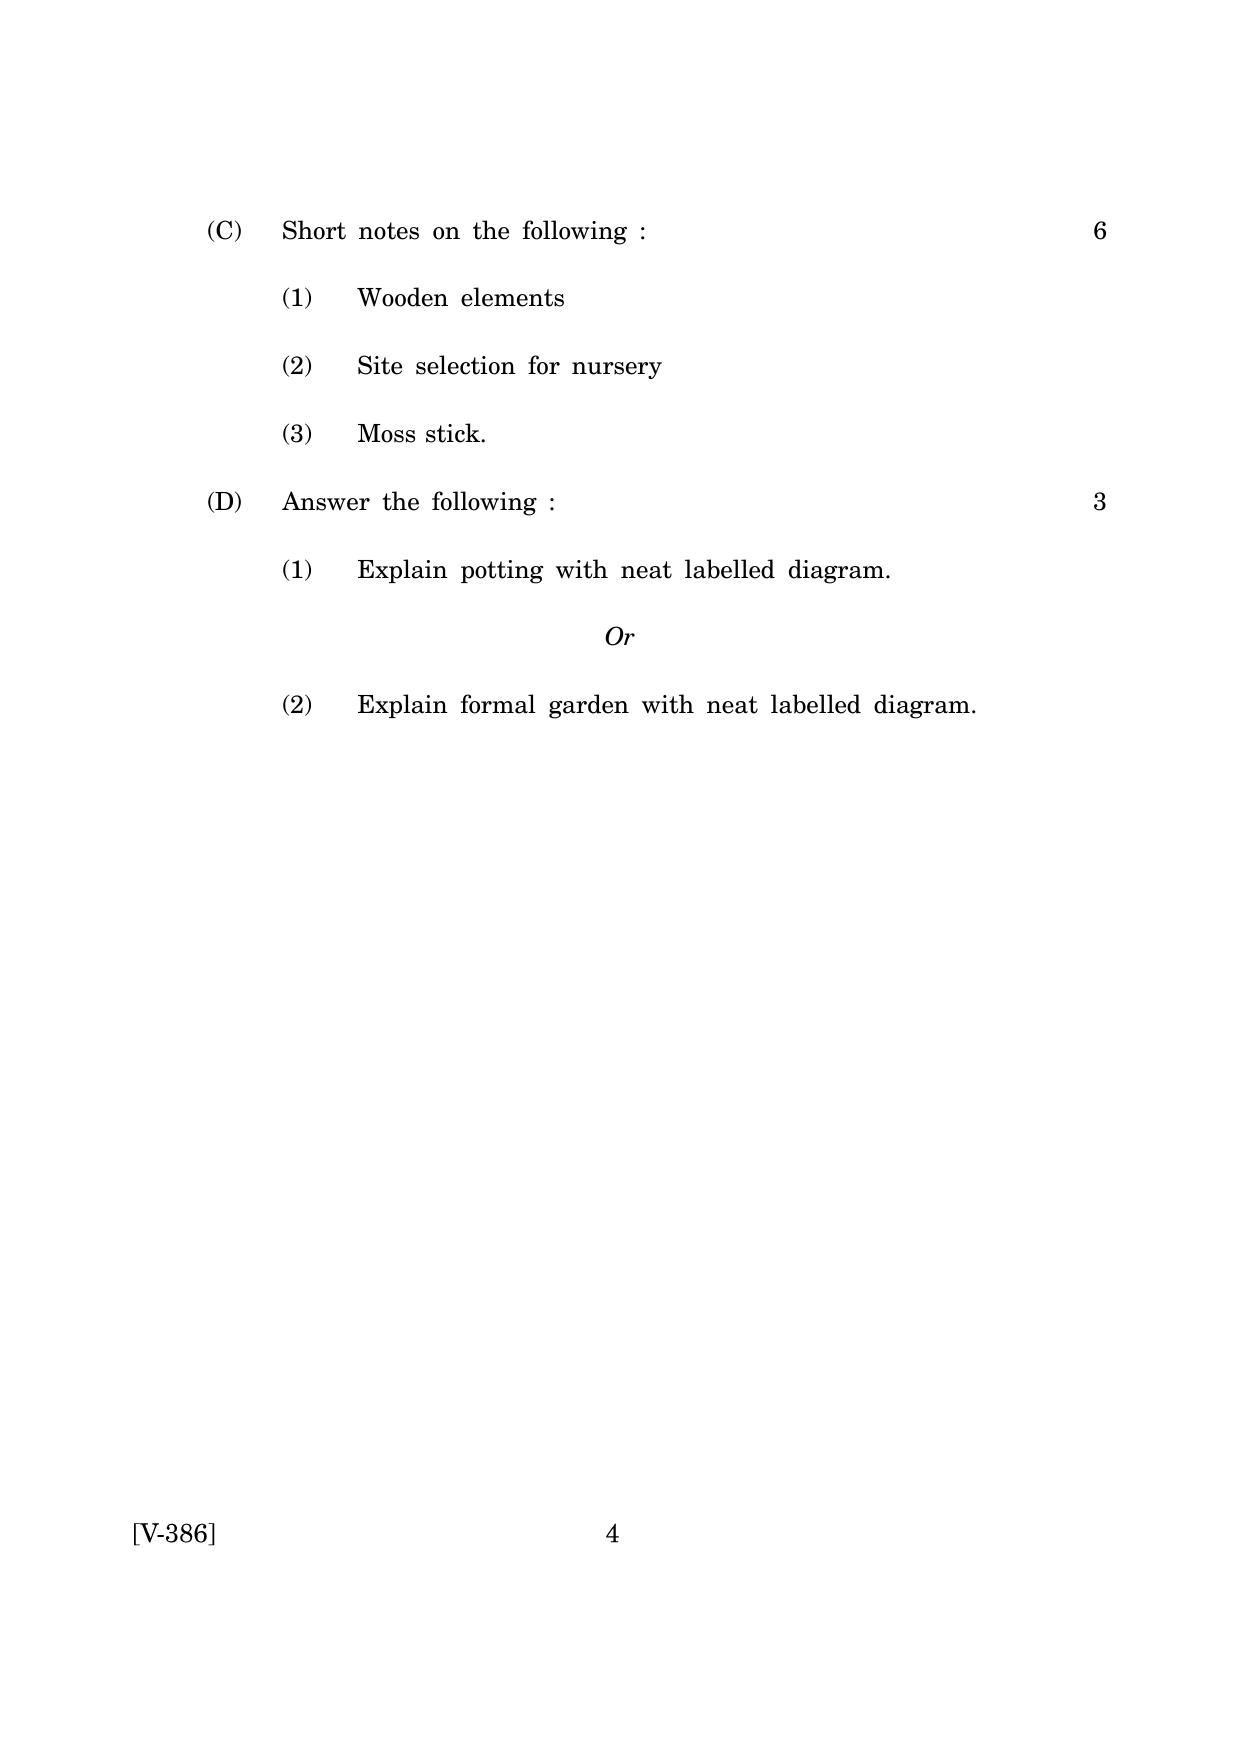 Goa Board Class 12 Gardening & Landscaping   (March 2019) Question Paper - Page 4